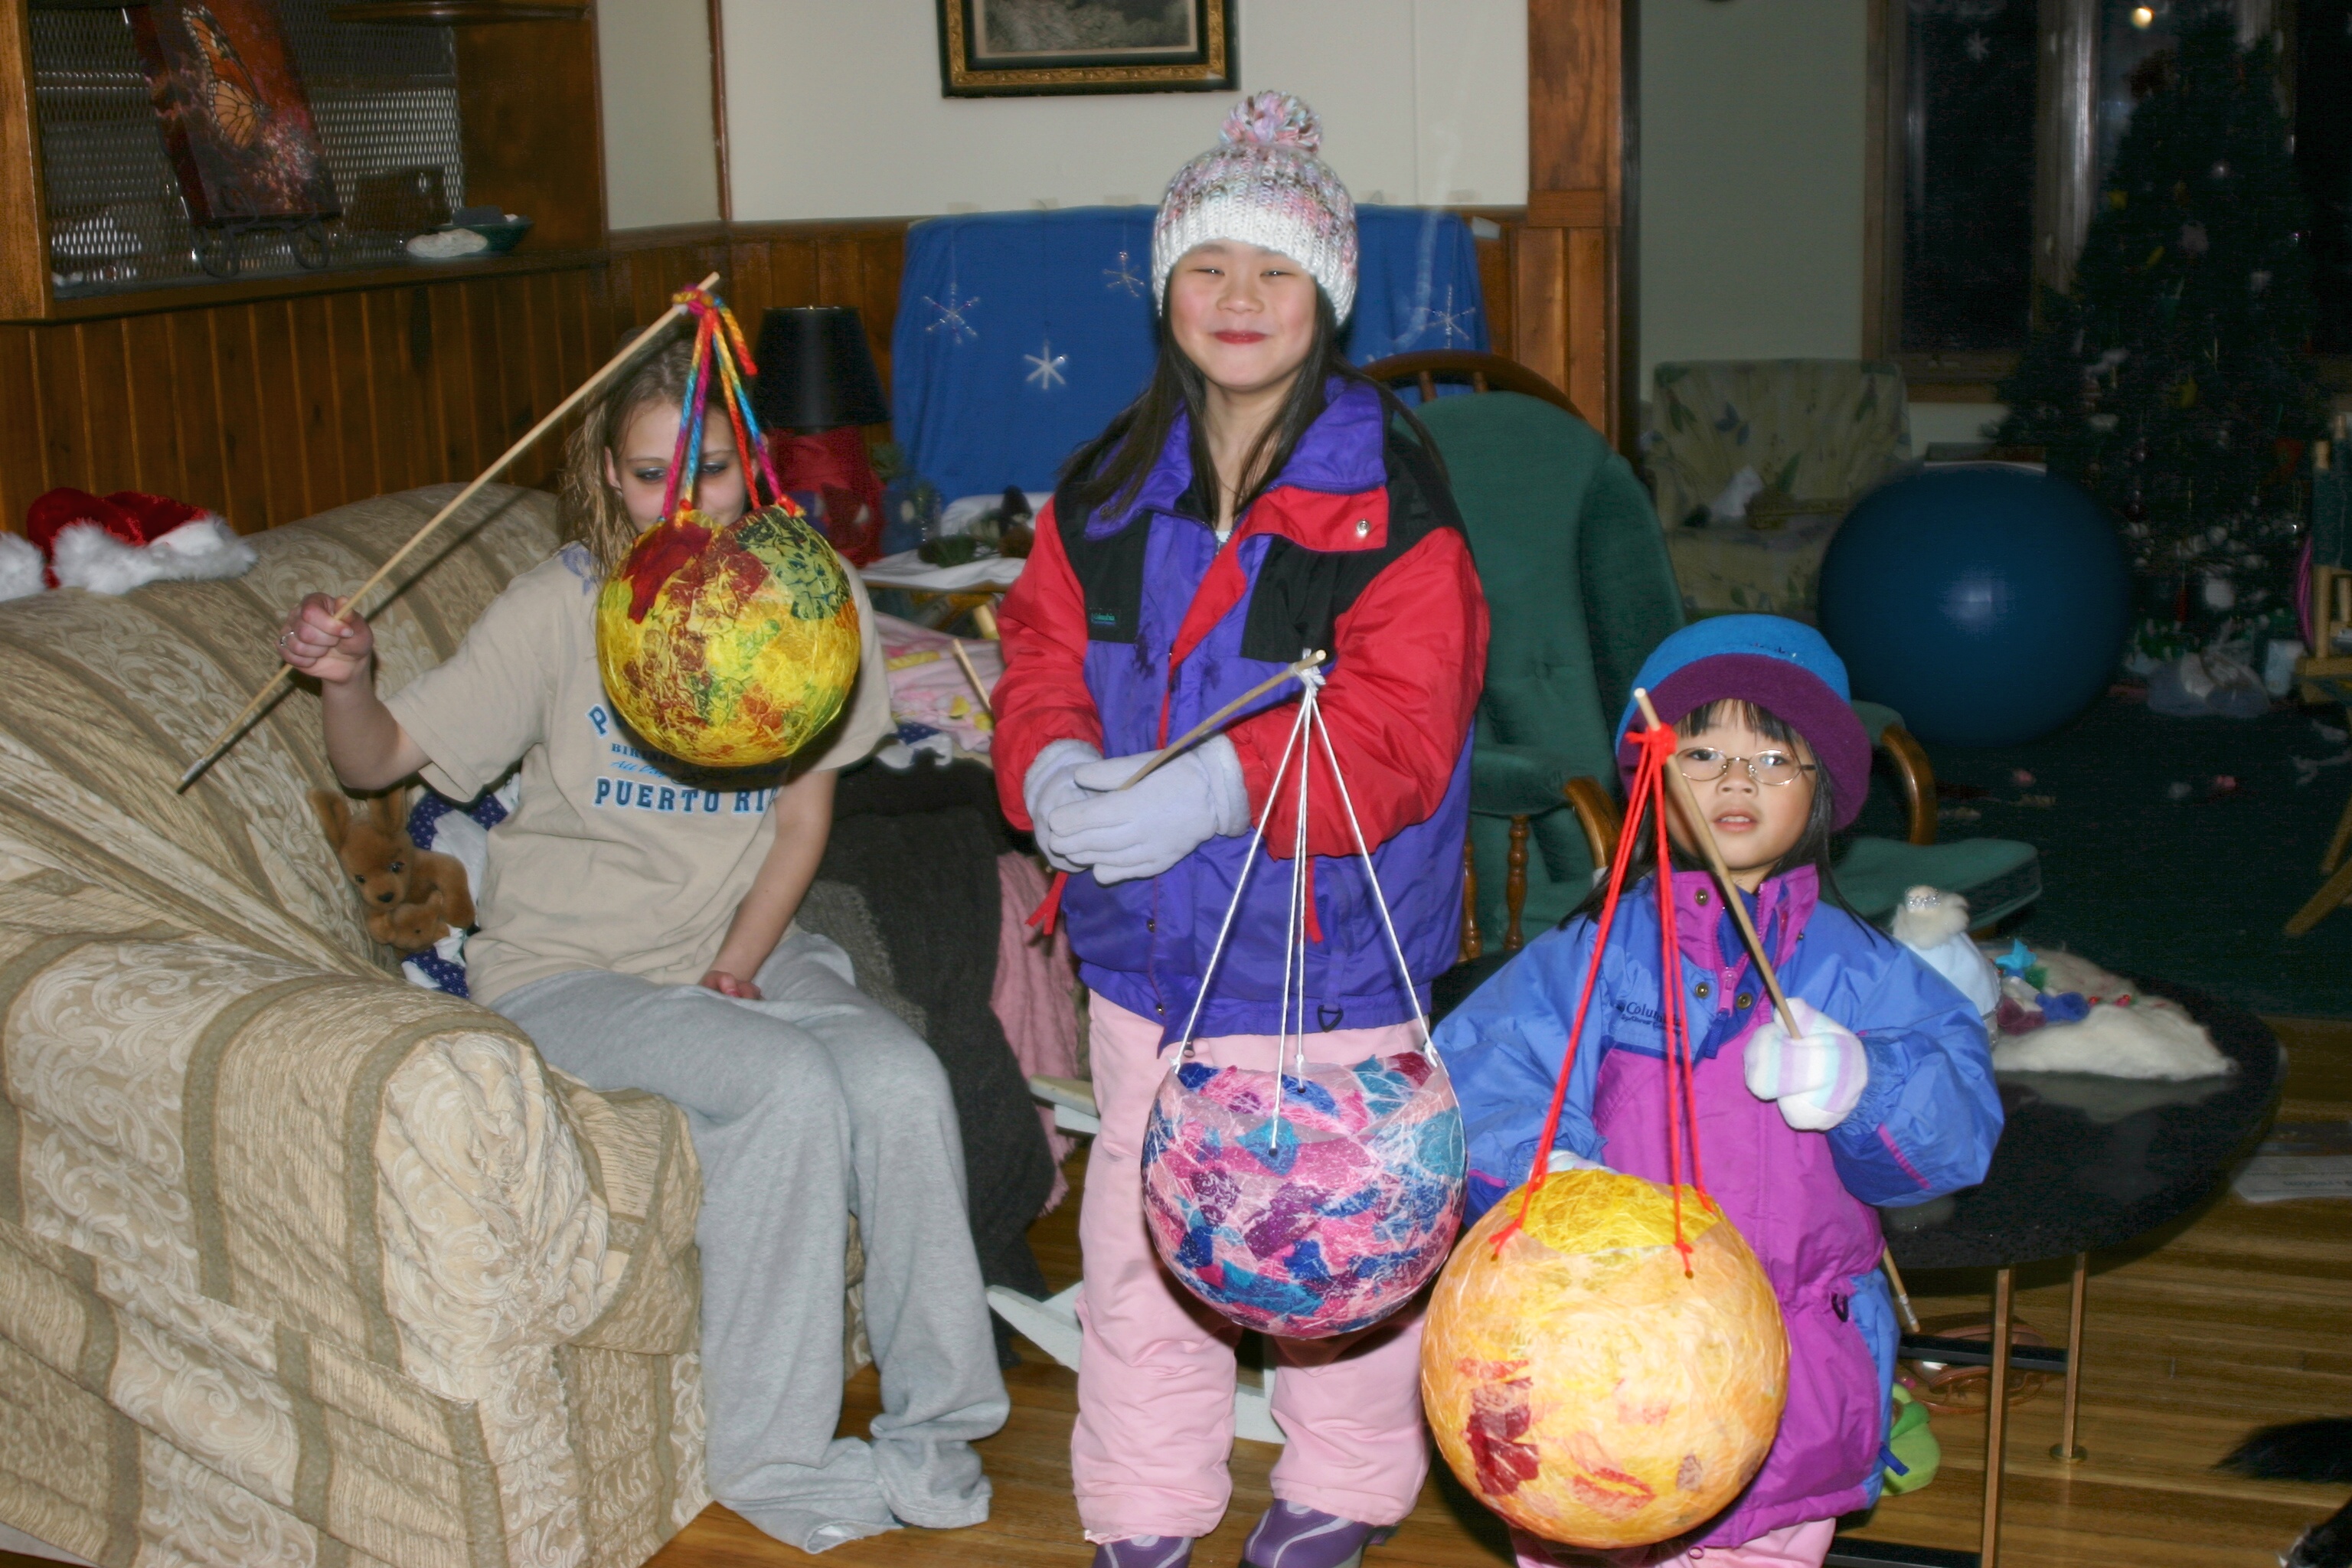 The Girls and their cousin Ashley with Balloon Lanterns